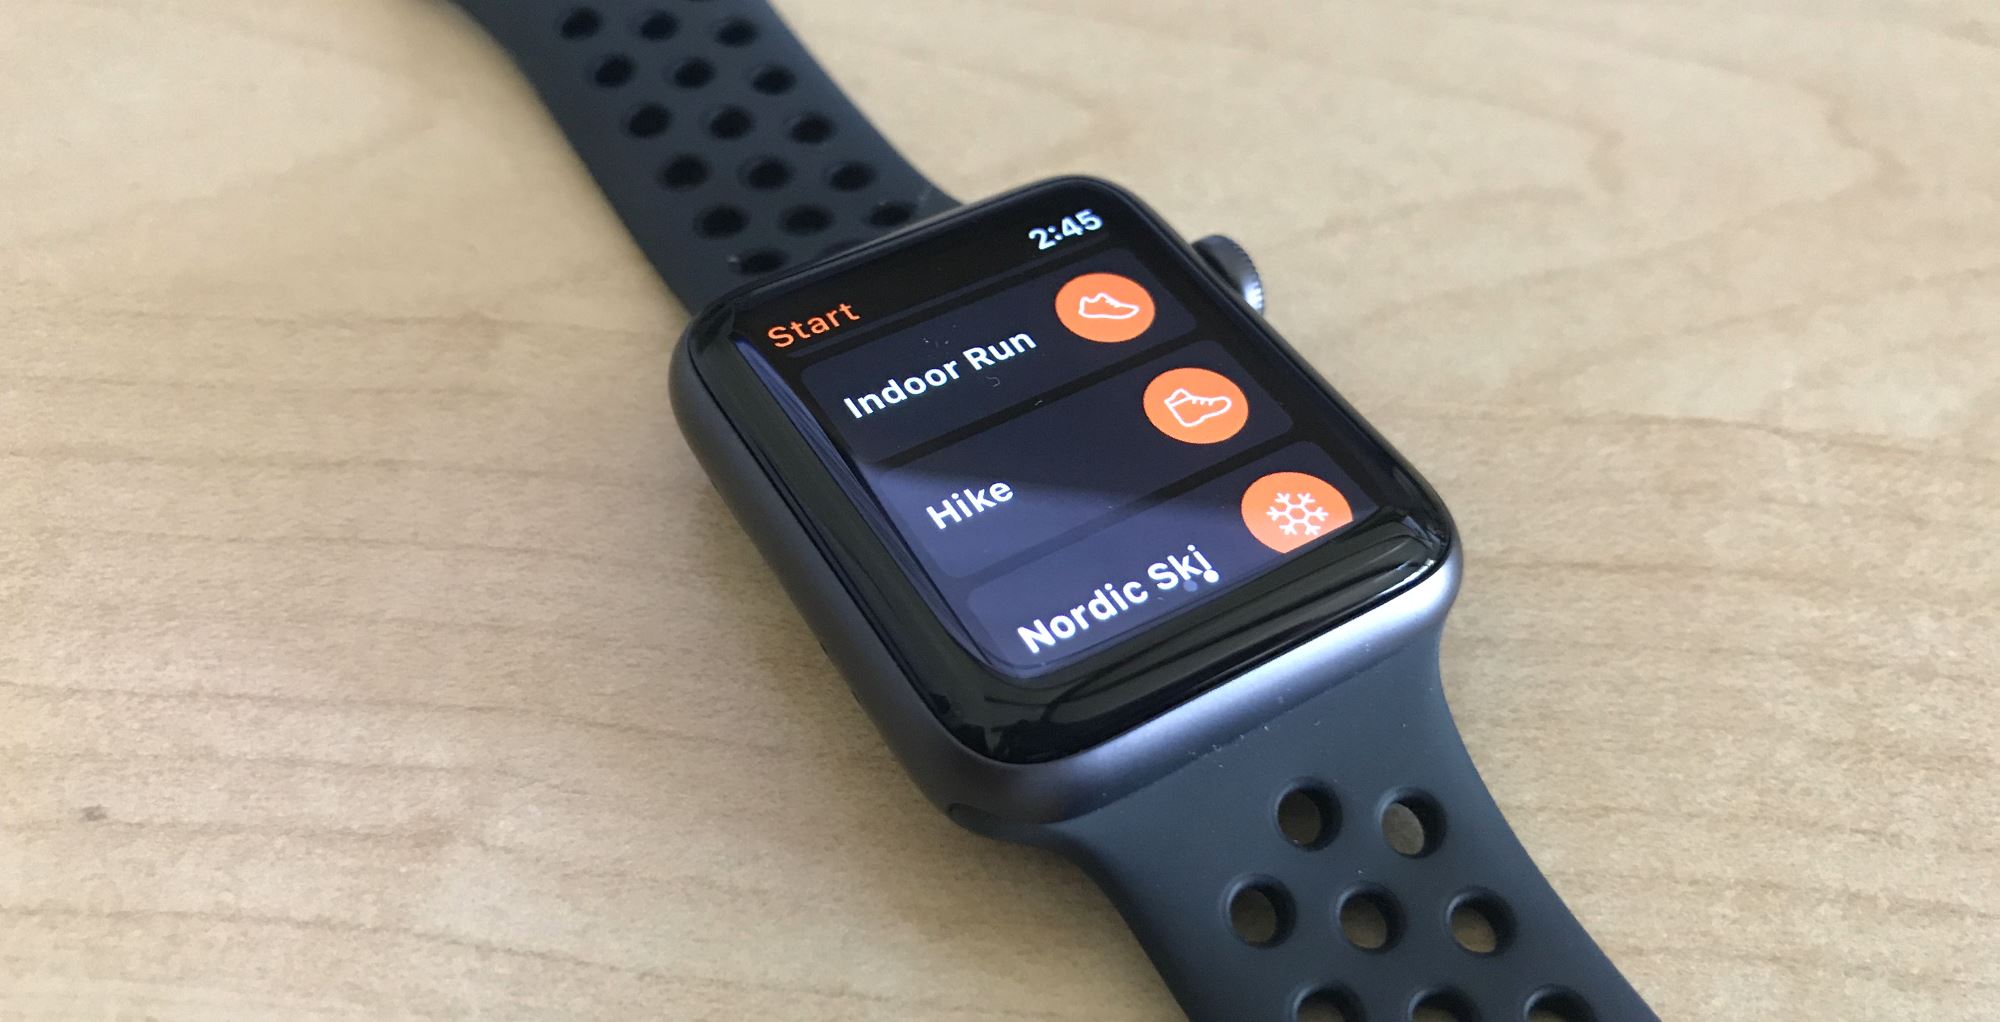 Honesto Residente Enriquecer Does the Apple Watch Series 3 Work with Strava? - The Frugal Noodle